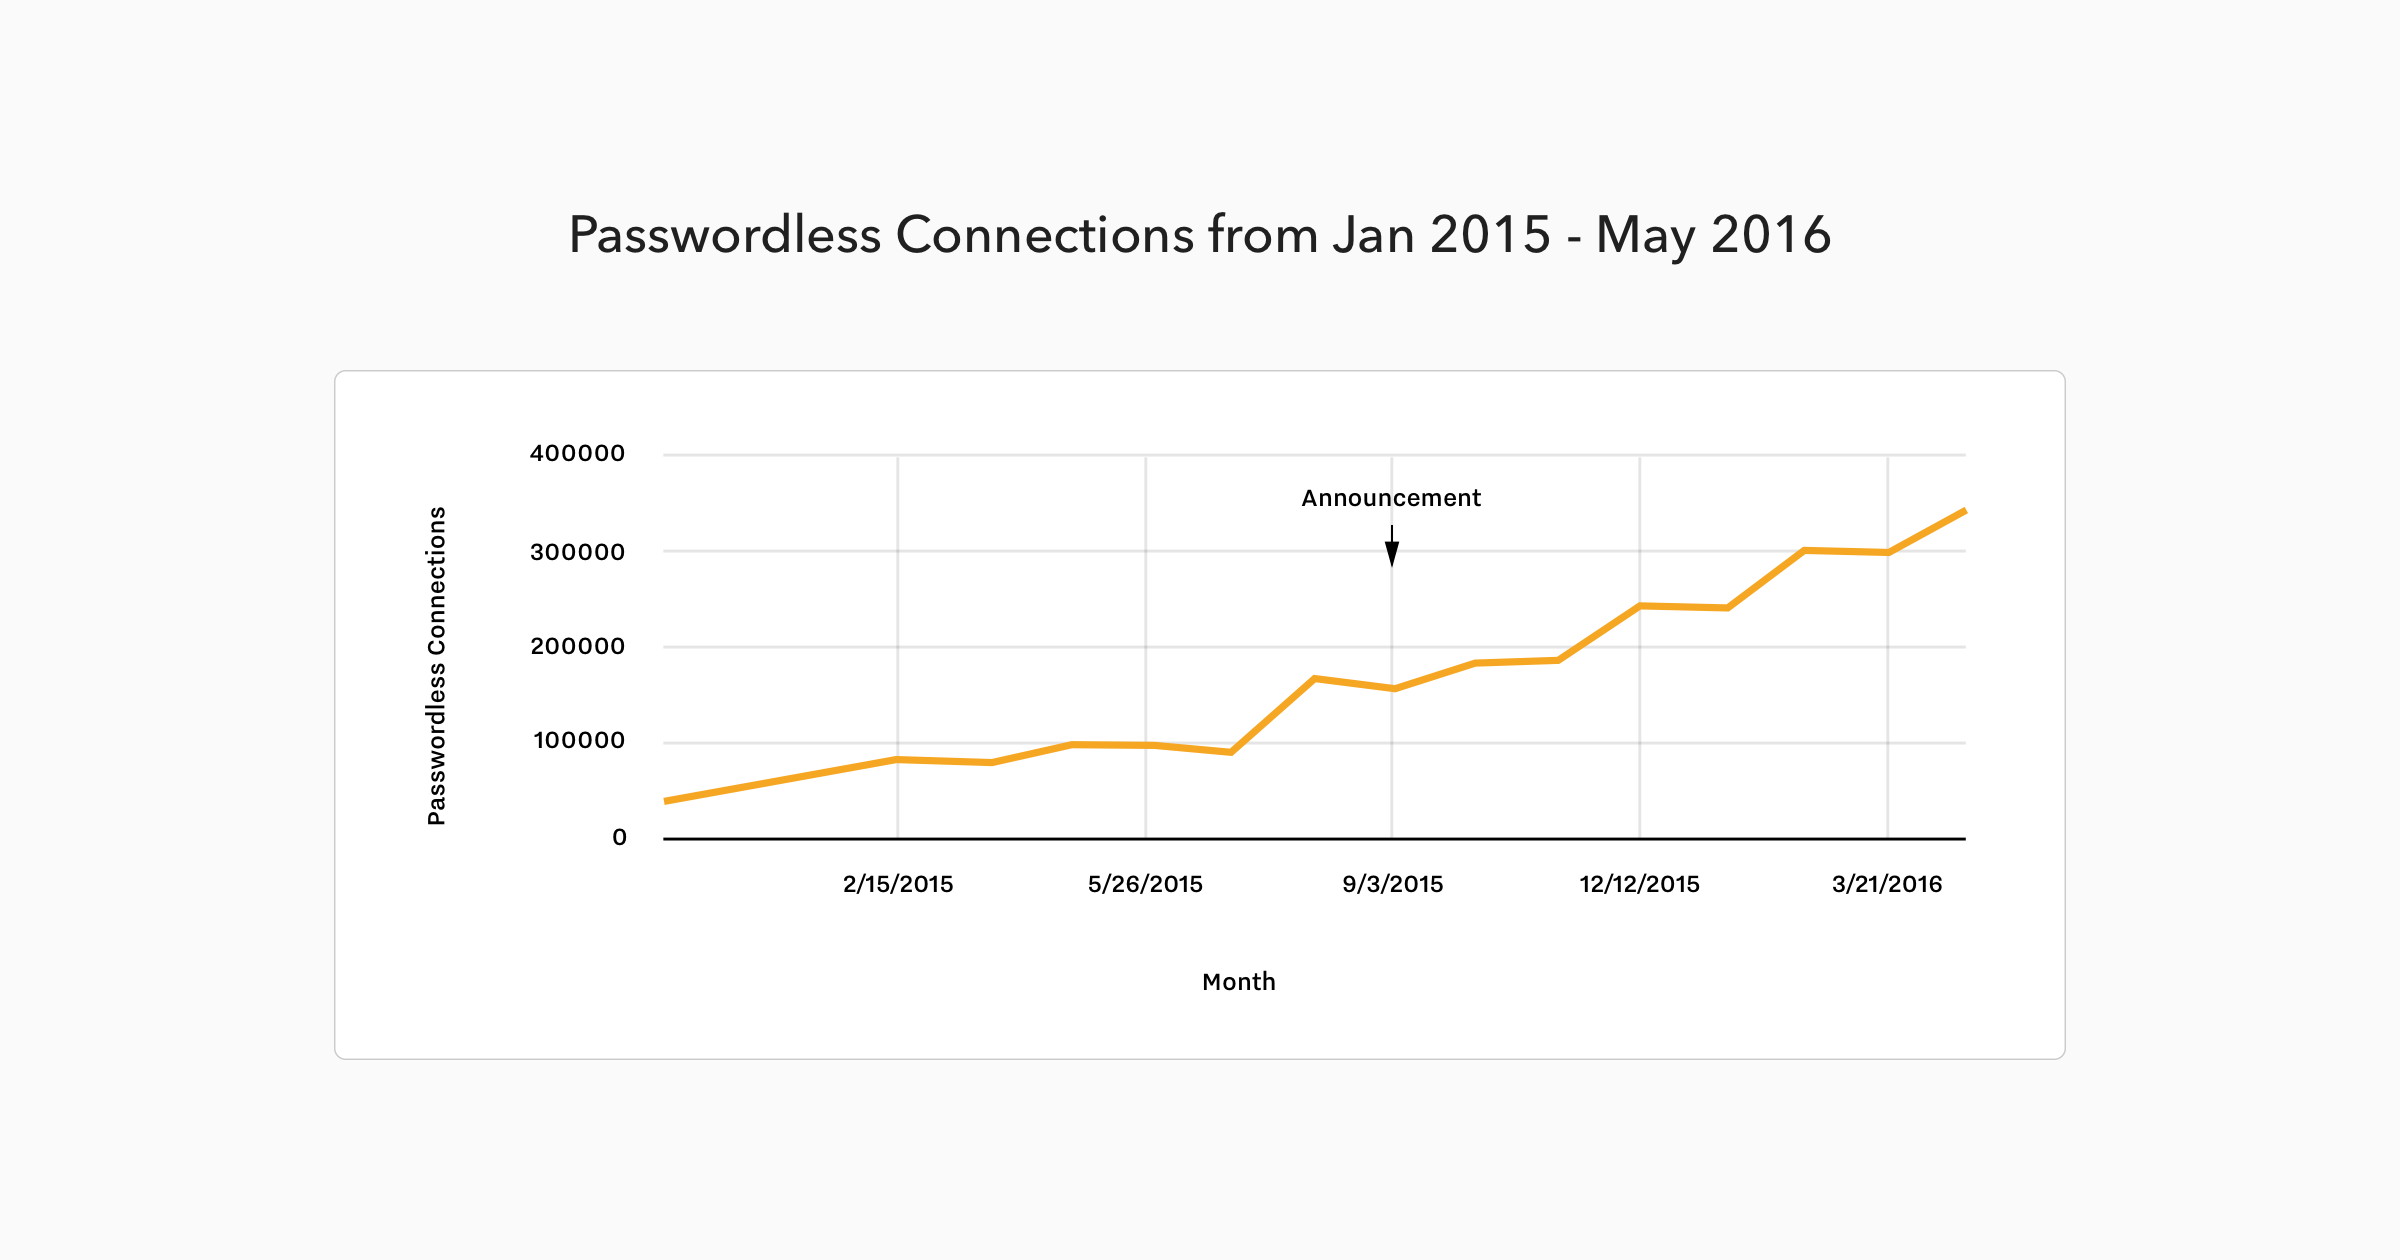 Passwordless Connections from Jan 2015 to May 2016